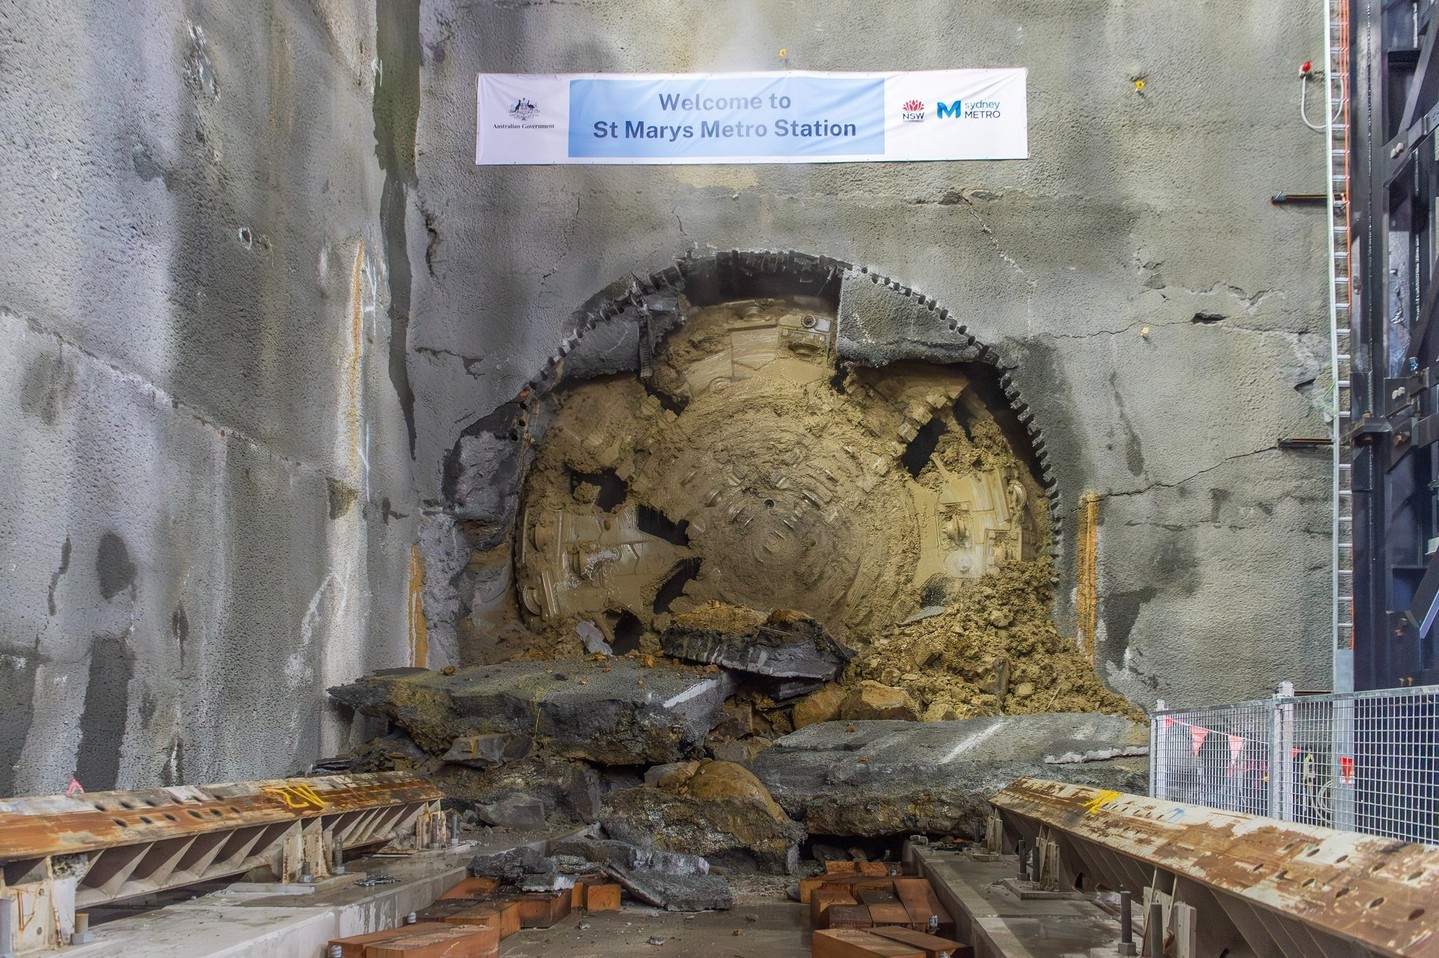 Four Herrenknecht tunnel boring machines (TBMs) —Catherine, Eileen, Peggy and Marlene—have successfully completed their journeys, building rail tunnels for the Sydney Metro – Western Sydney Airport project. The new metro railway will become the transport 